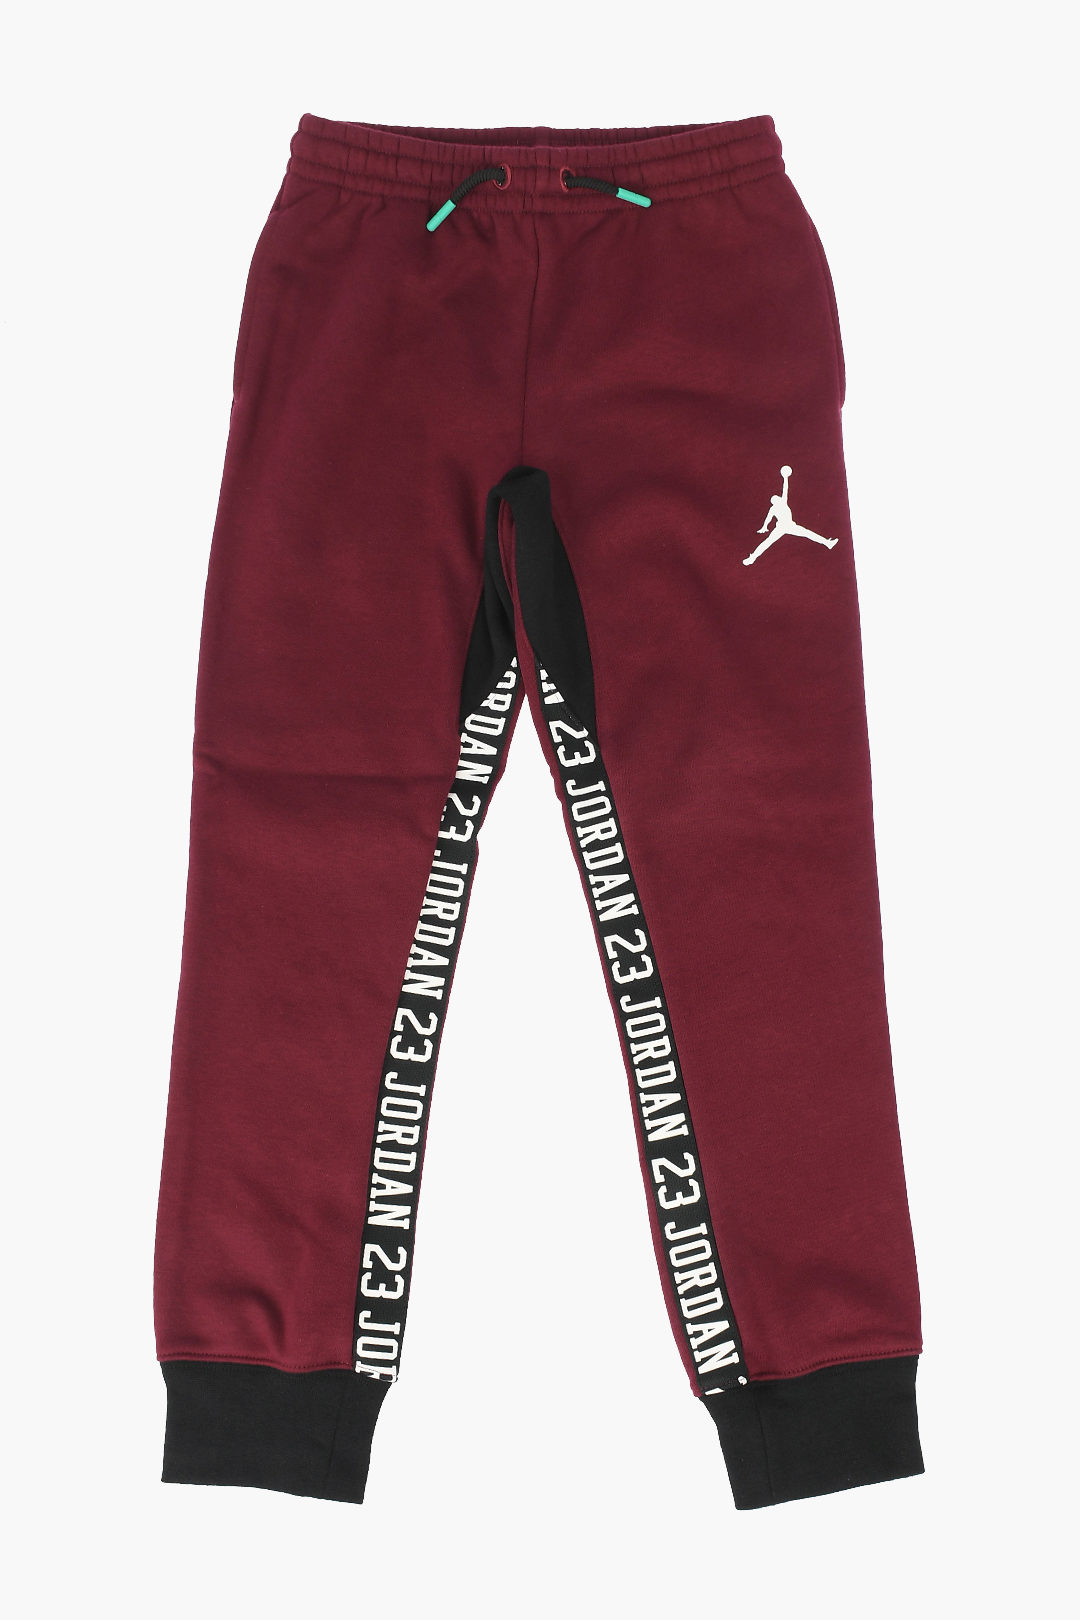 Nike KIDS AIR JORDAN joggers JUMPMAN with contrasting band boys - Glamood  Outlet